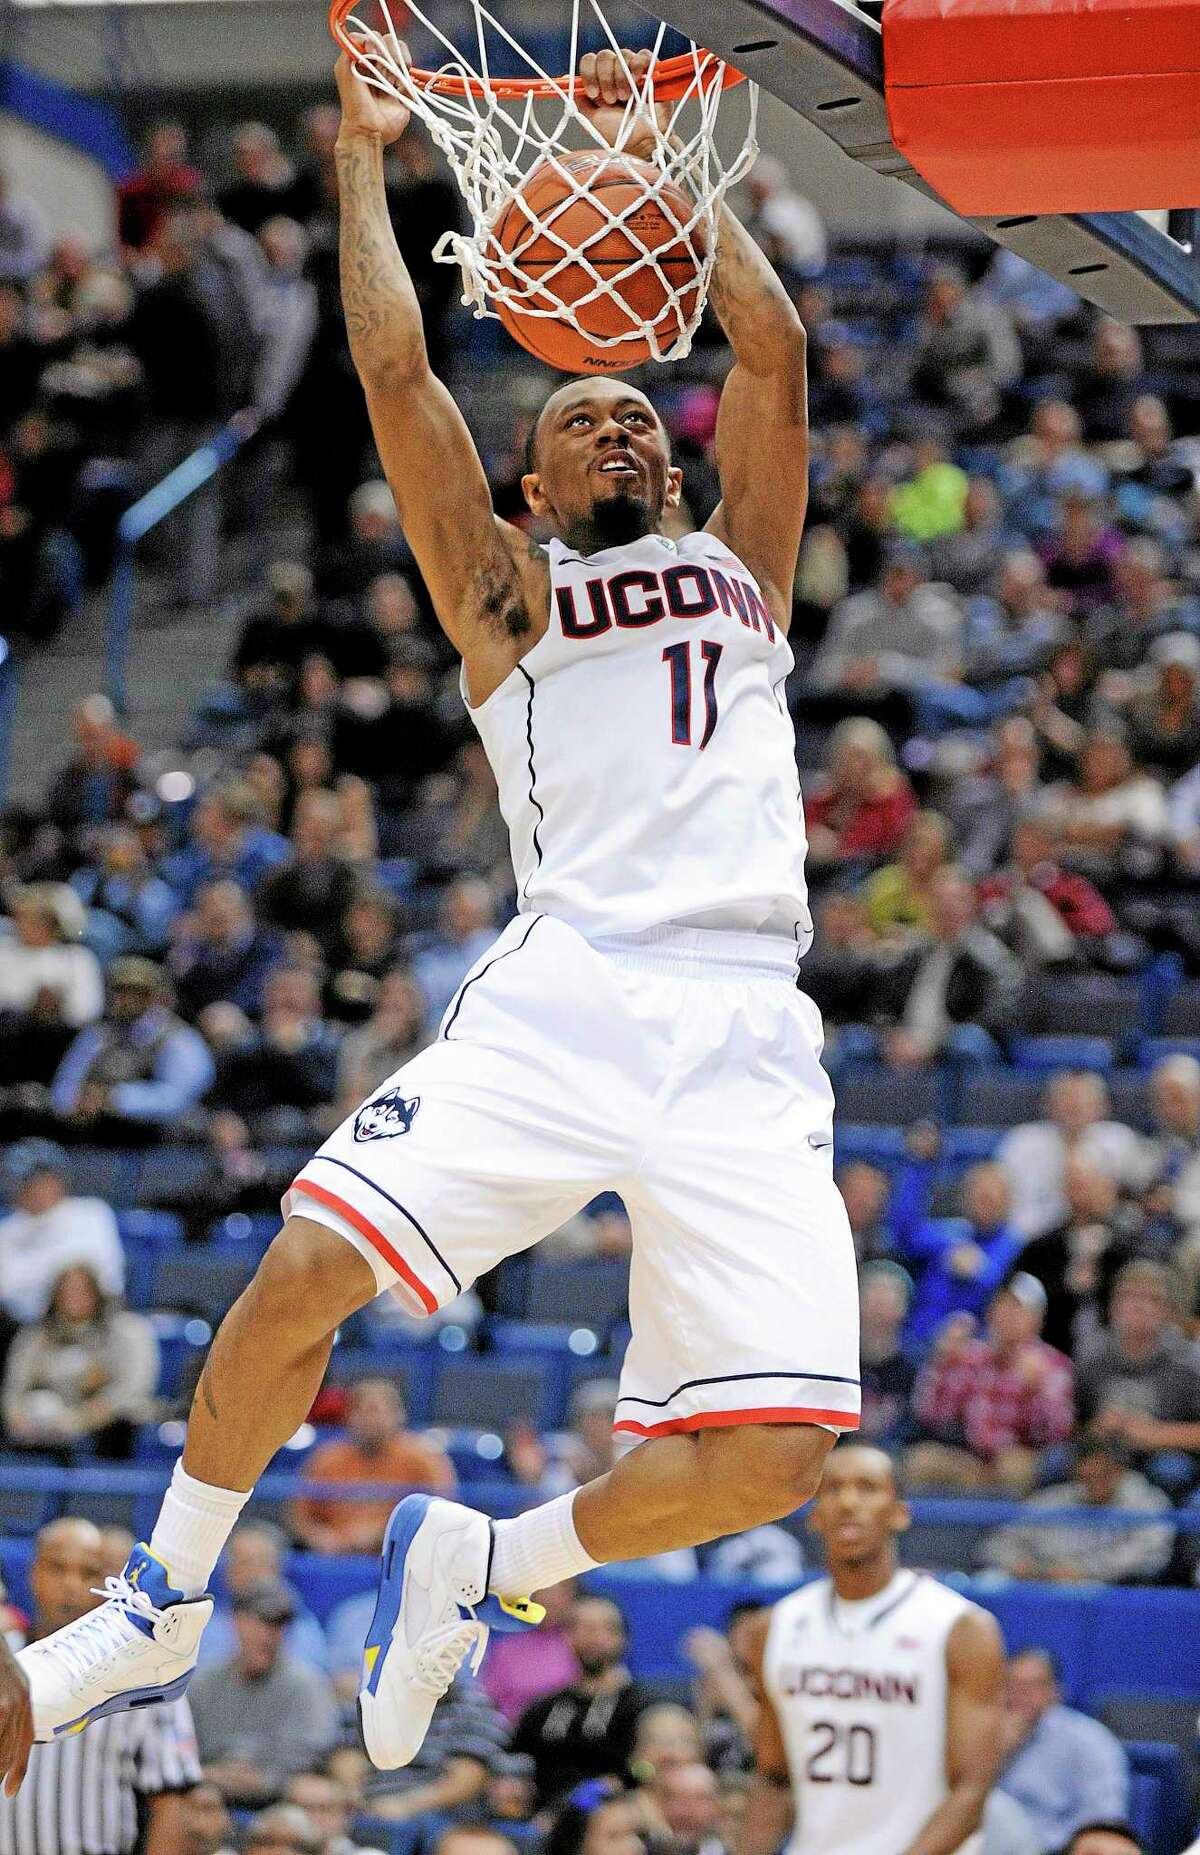 UConn’s Ryan Boatright scores two of his team-high 17 points during the first half of the 12th-ranked Huskies’ 95-68 victory over Maine on Friday night at the XL Center in Hartford.